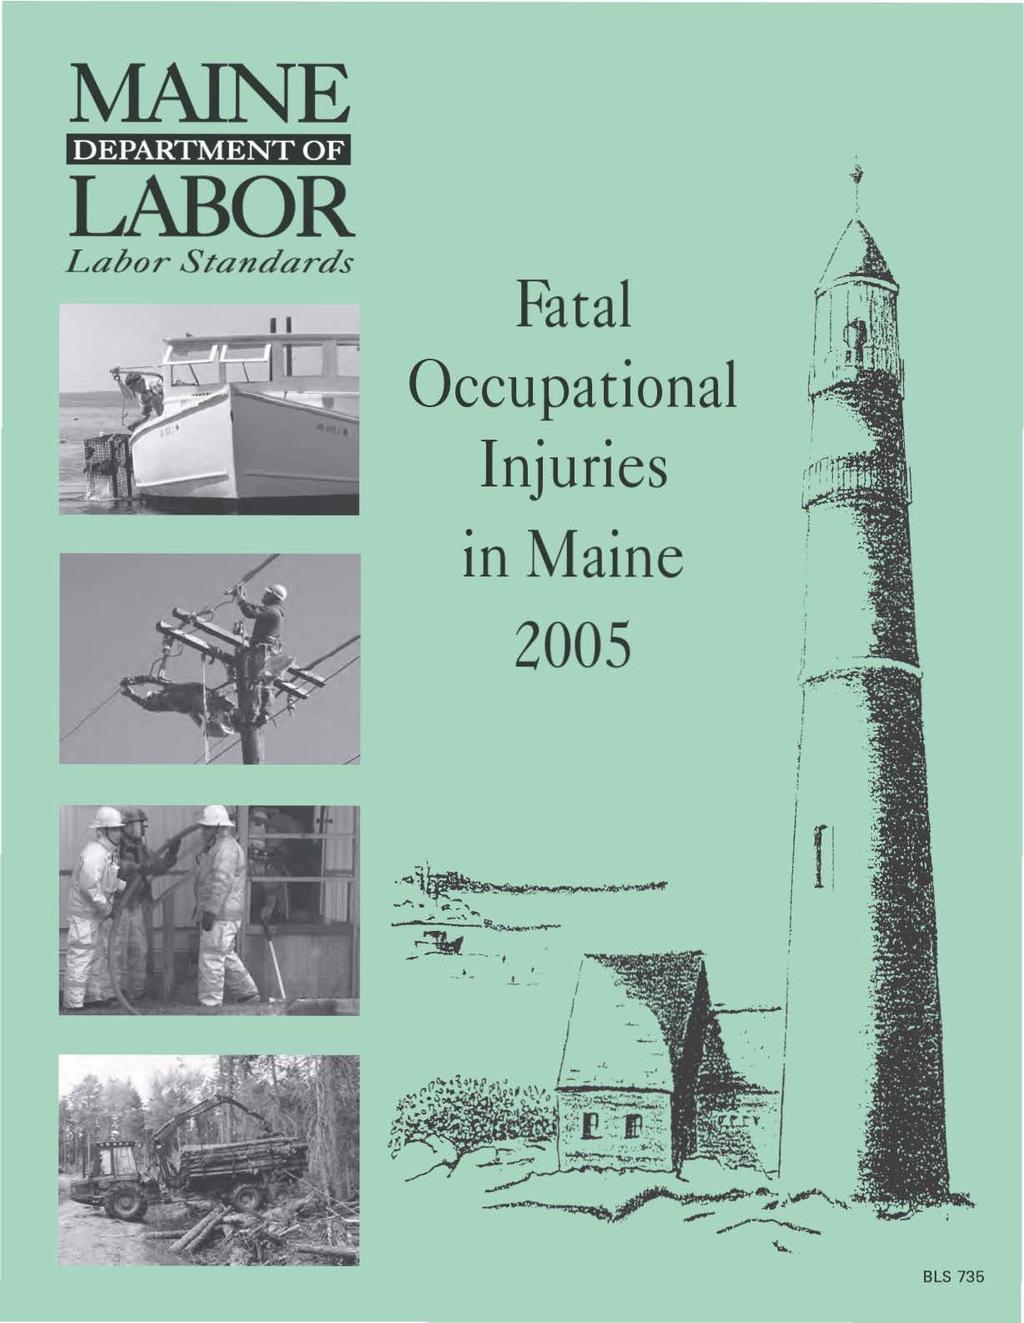 MAINE DEPARTMENT OF LABOR Labor Standards Fatal